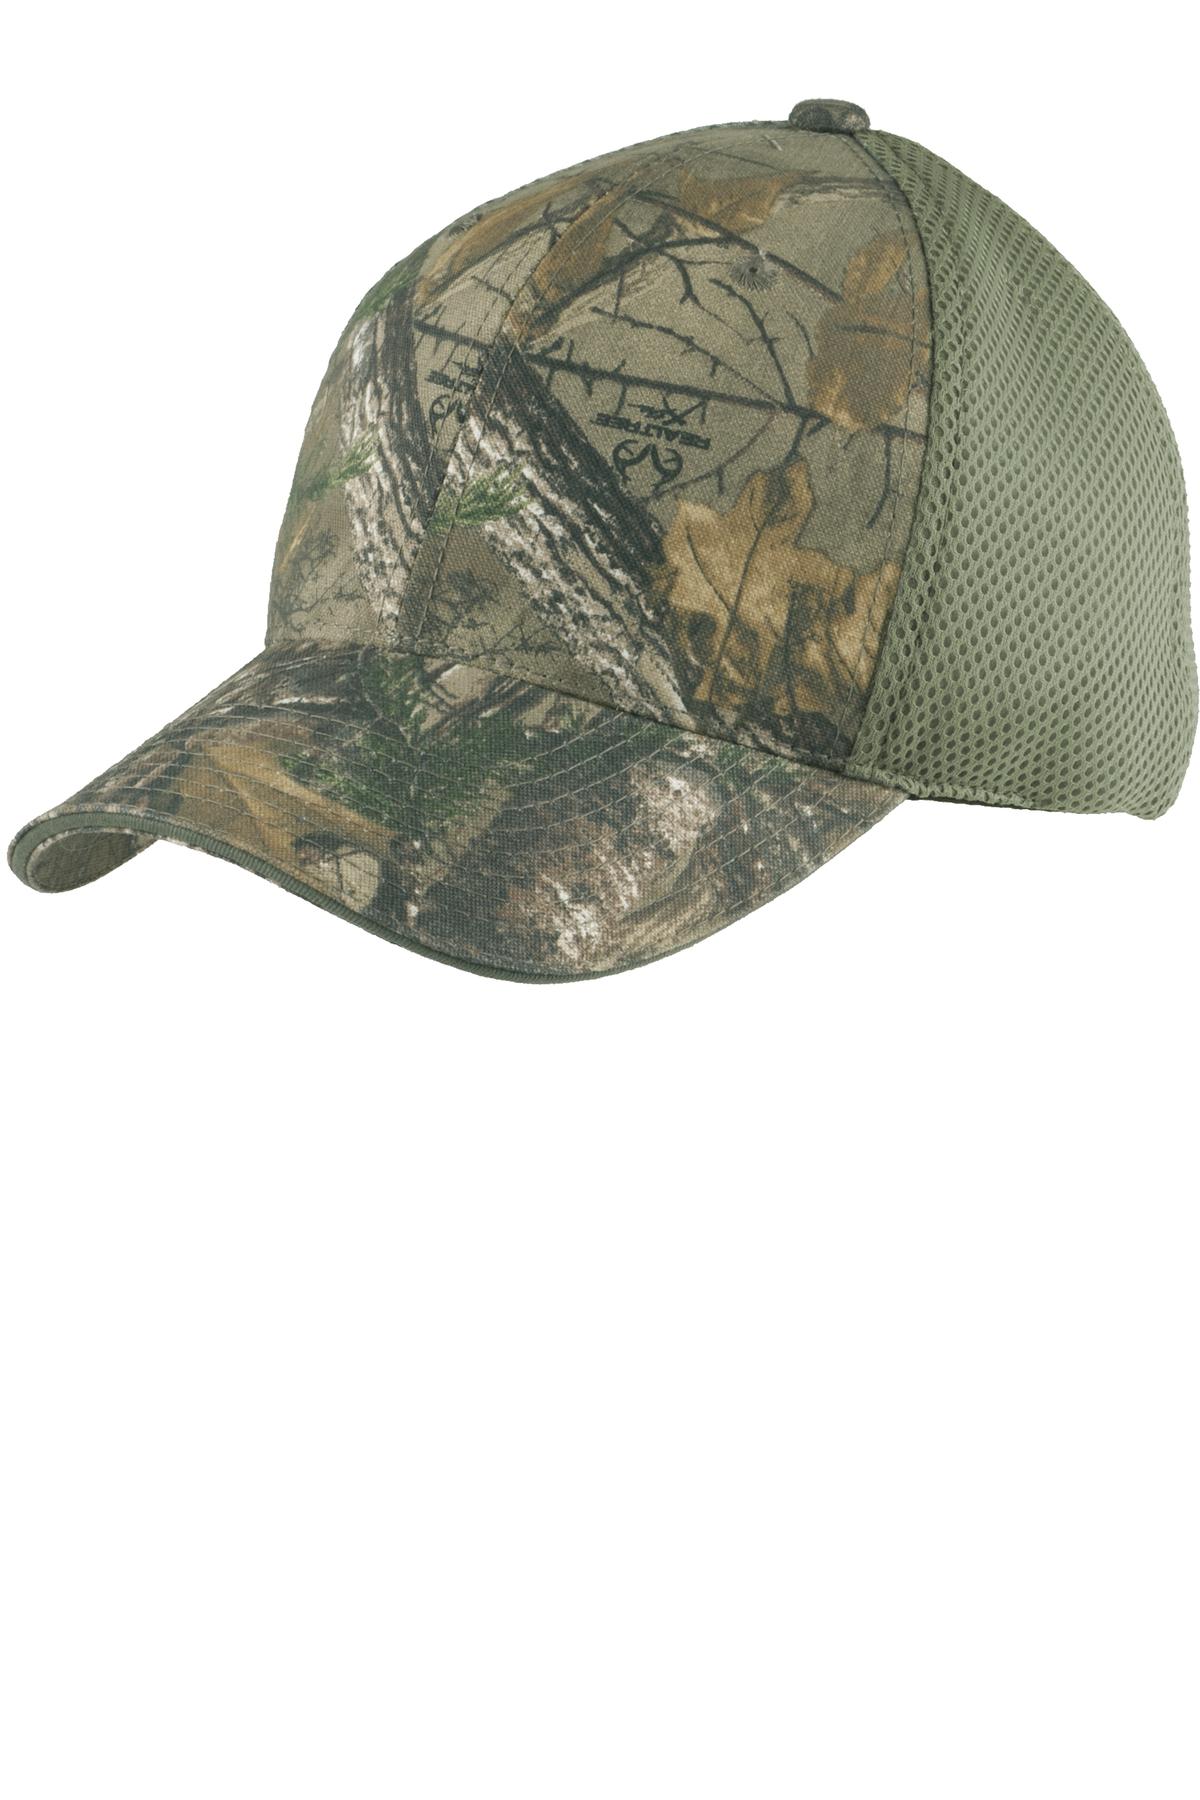 Port Authority Camouflage Cap with Air Mesh Back-